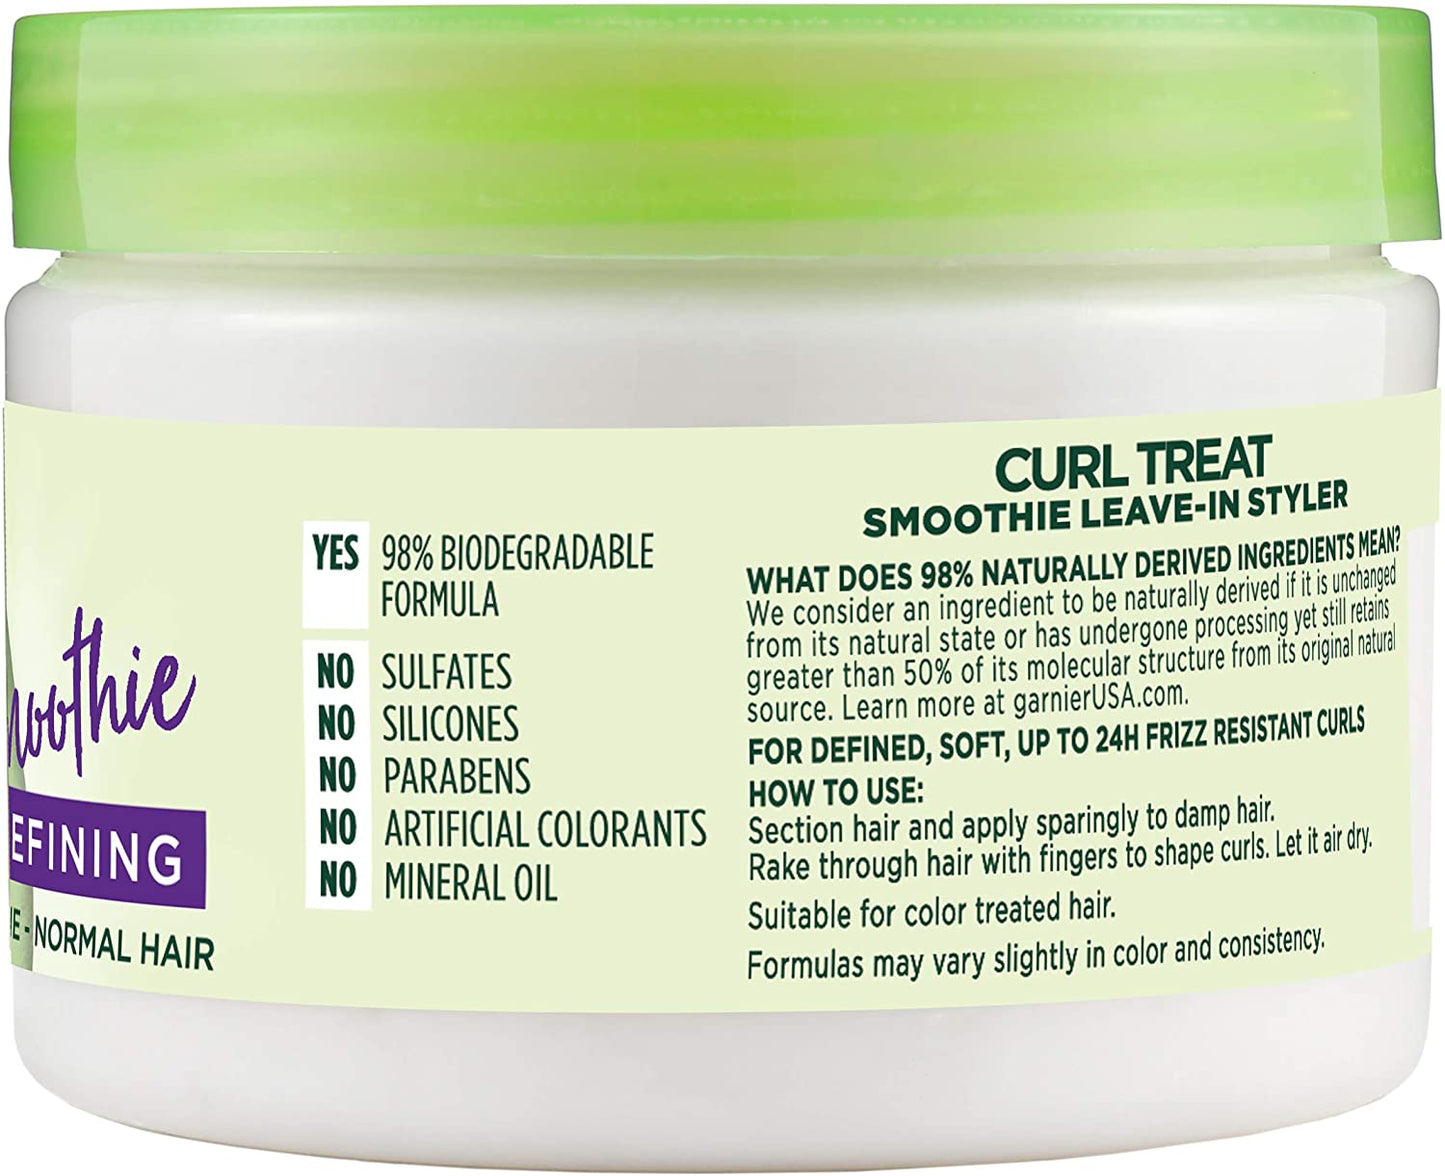 Garnier Fructis Style Curl Treat Defining Smoothie for Fine to Normal Curly Hair, 10.5 fl.oz / 311ml